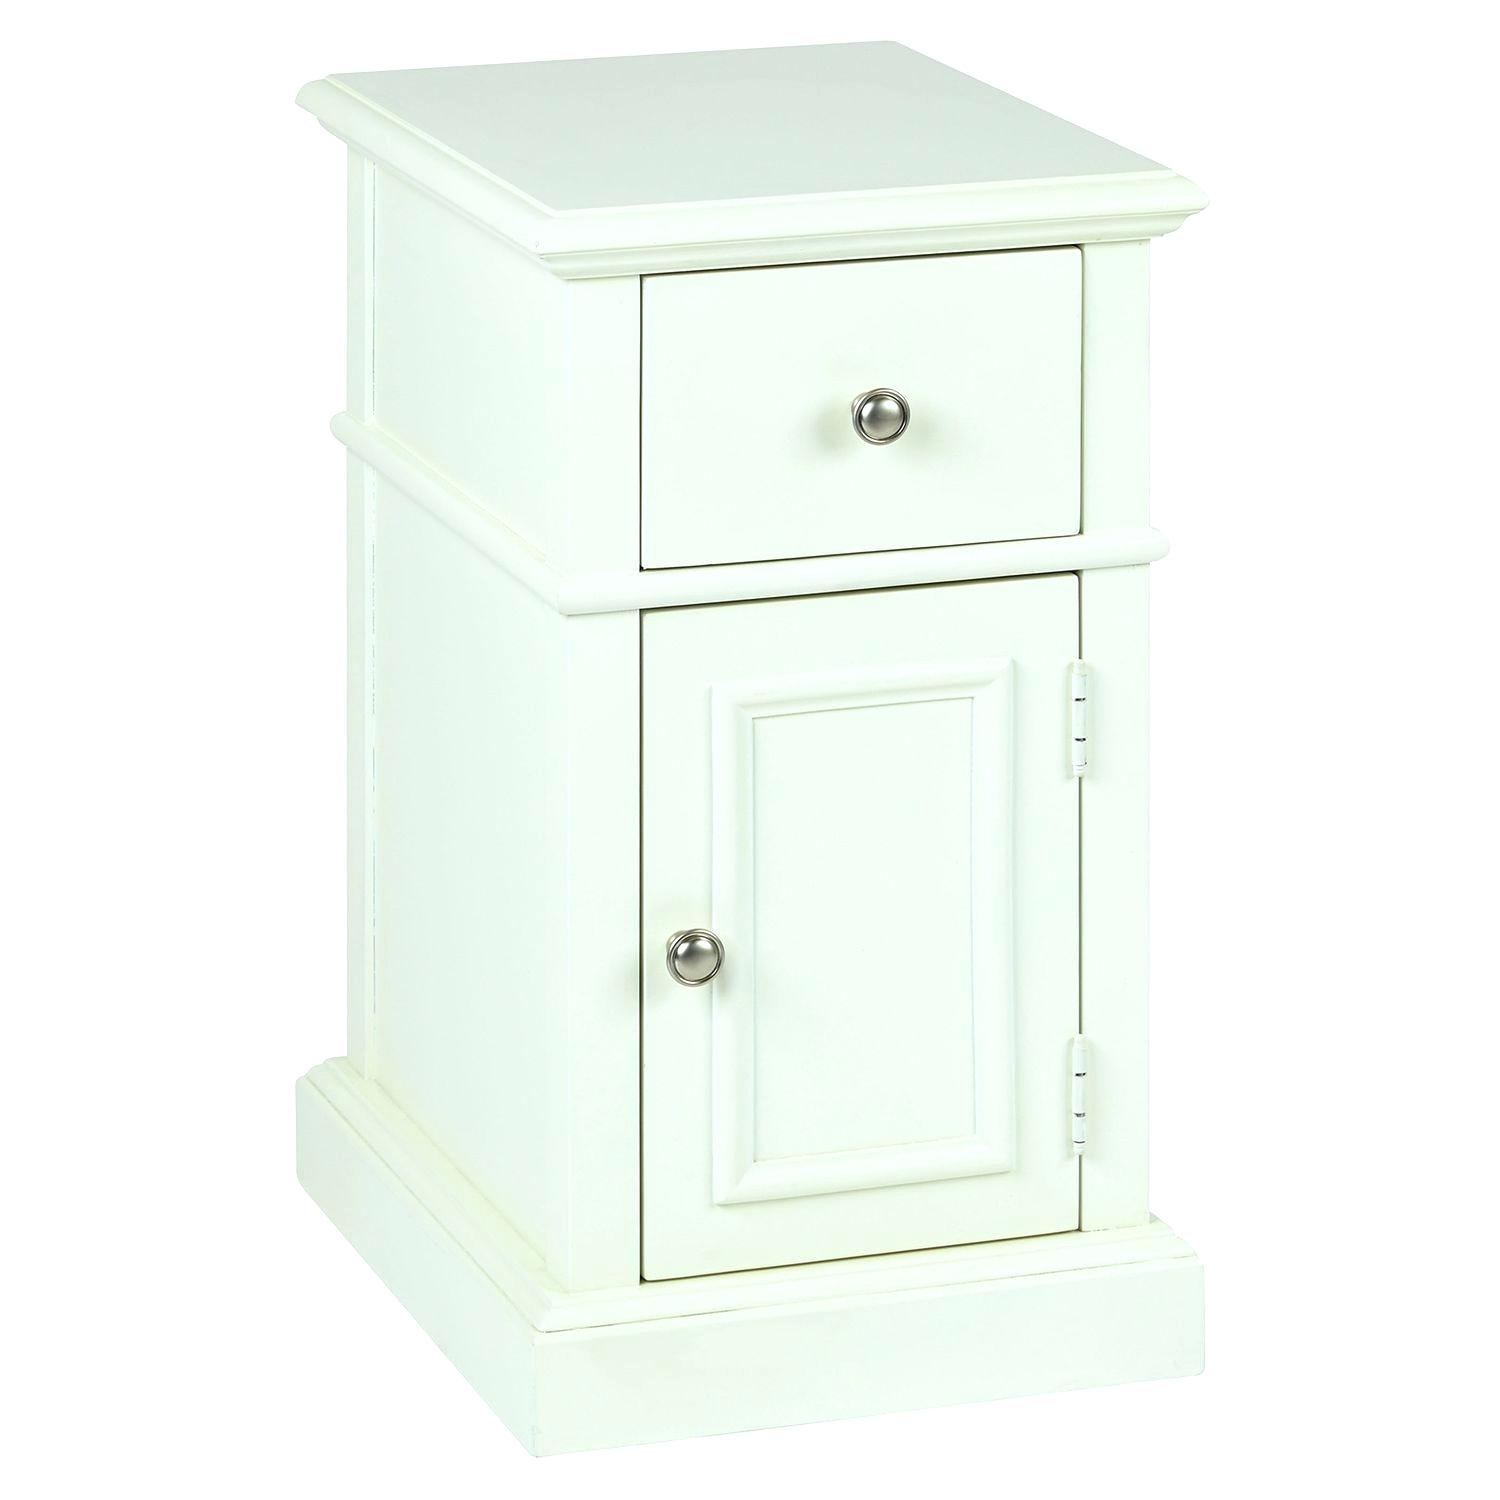 pier accent table tables vupad perched bird modern kitchen clocks front hall glass wine rack west elm coupon code chests and consoles small dresser lamps half moon ethan allen